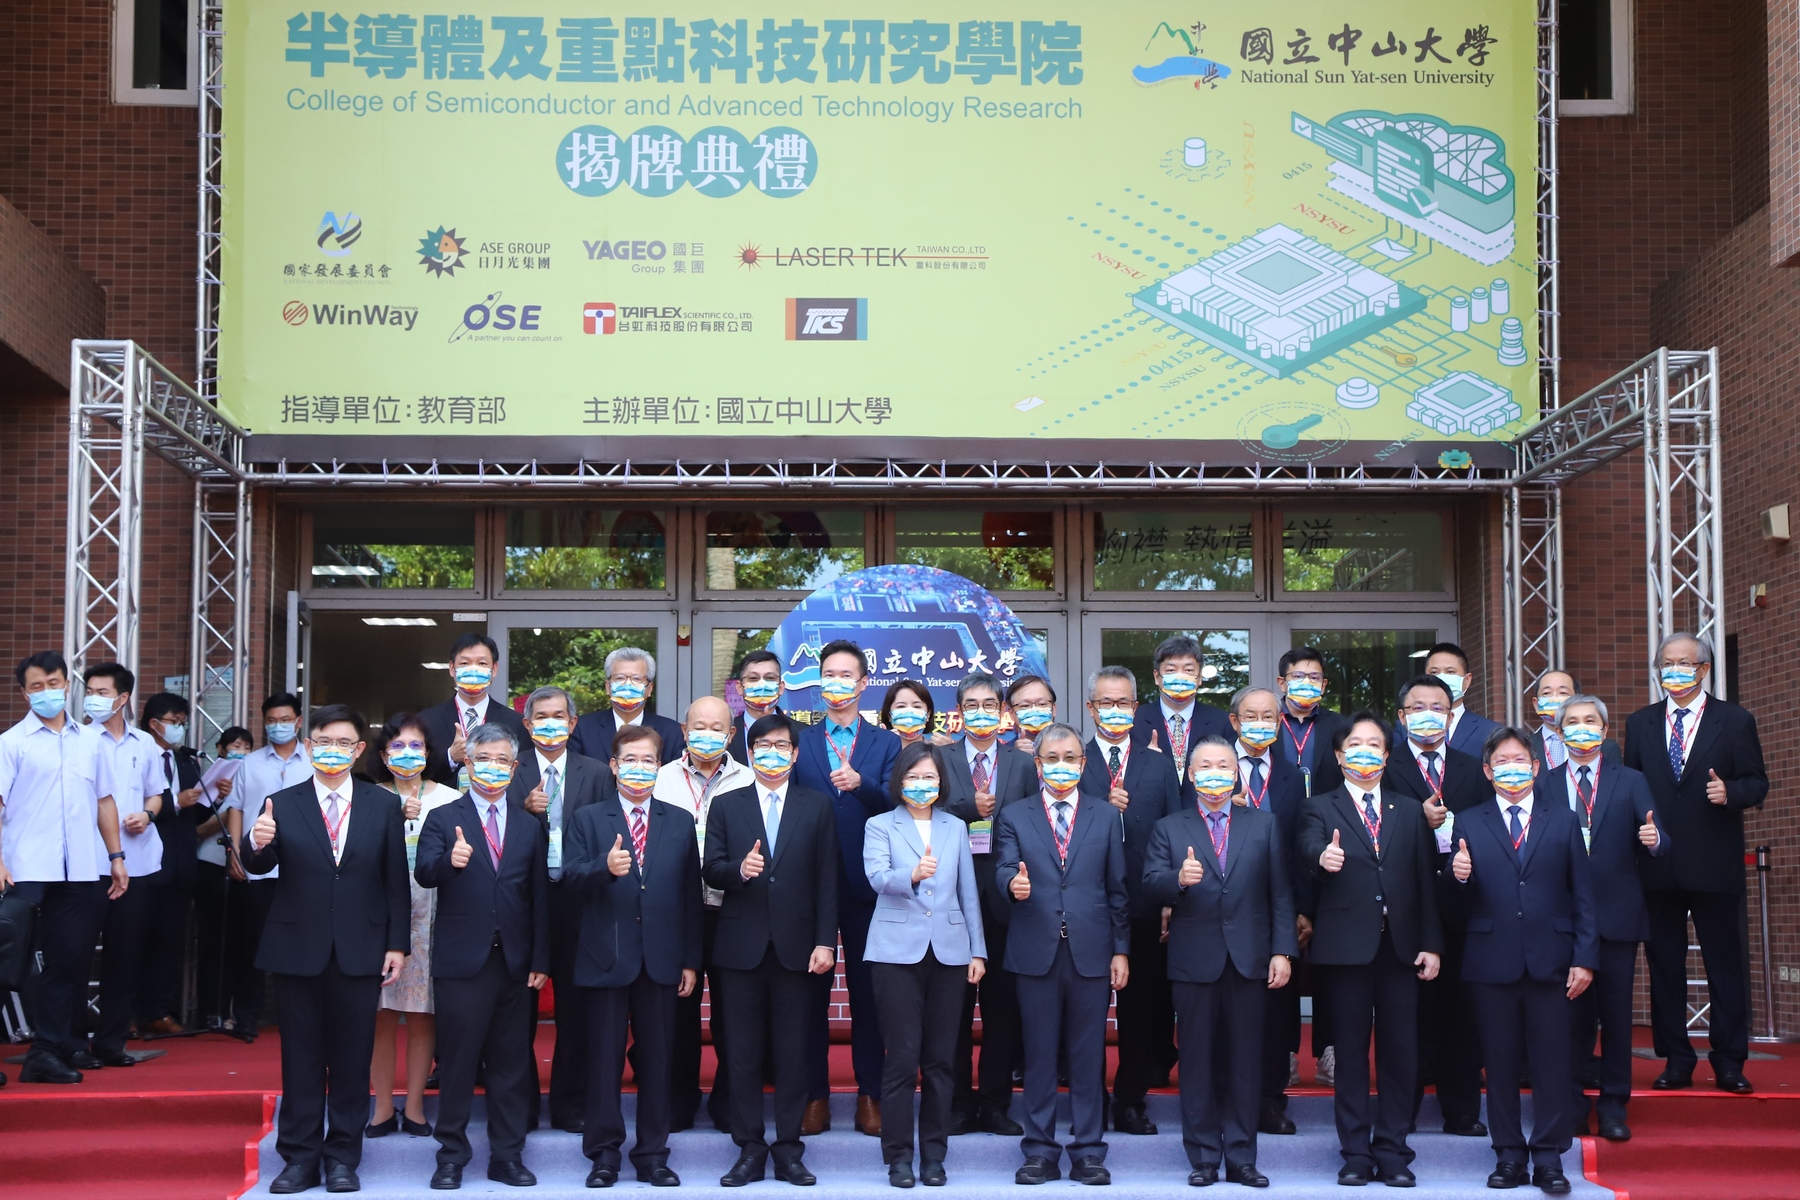 TSMC has decided to invest in Kaohsiung. NSYSU has teamed up with TSMC to establish the Institute of Innovative Semiconductor Manufacturing related to the middle reaches of the semiconductor industry chain and will train 25 masters’ and 5 doctoral students every year. The picture shows the establishment of NSYSU College of Semiconductor and Advanced Technology Research last year, and President Tsai Ing-wen personally unveiled the plaque.